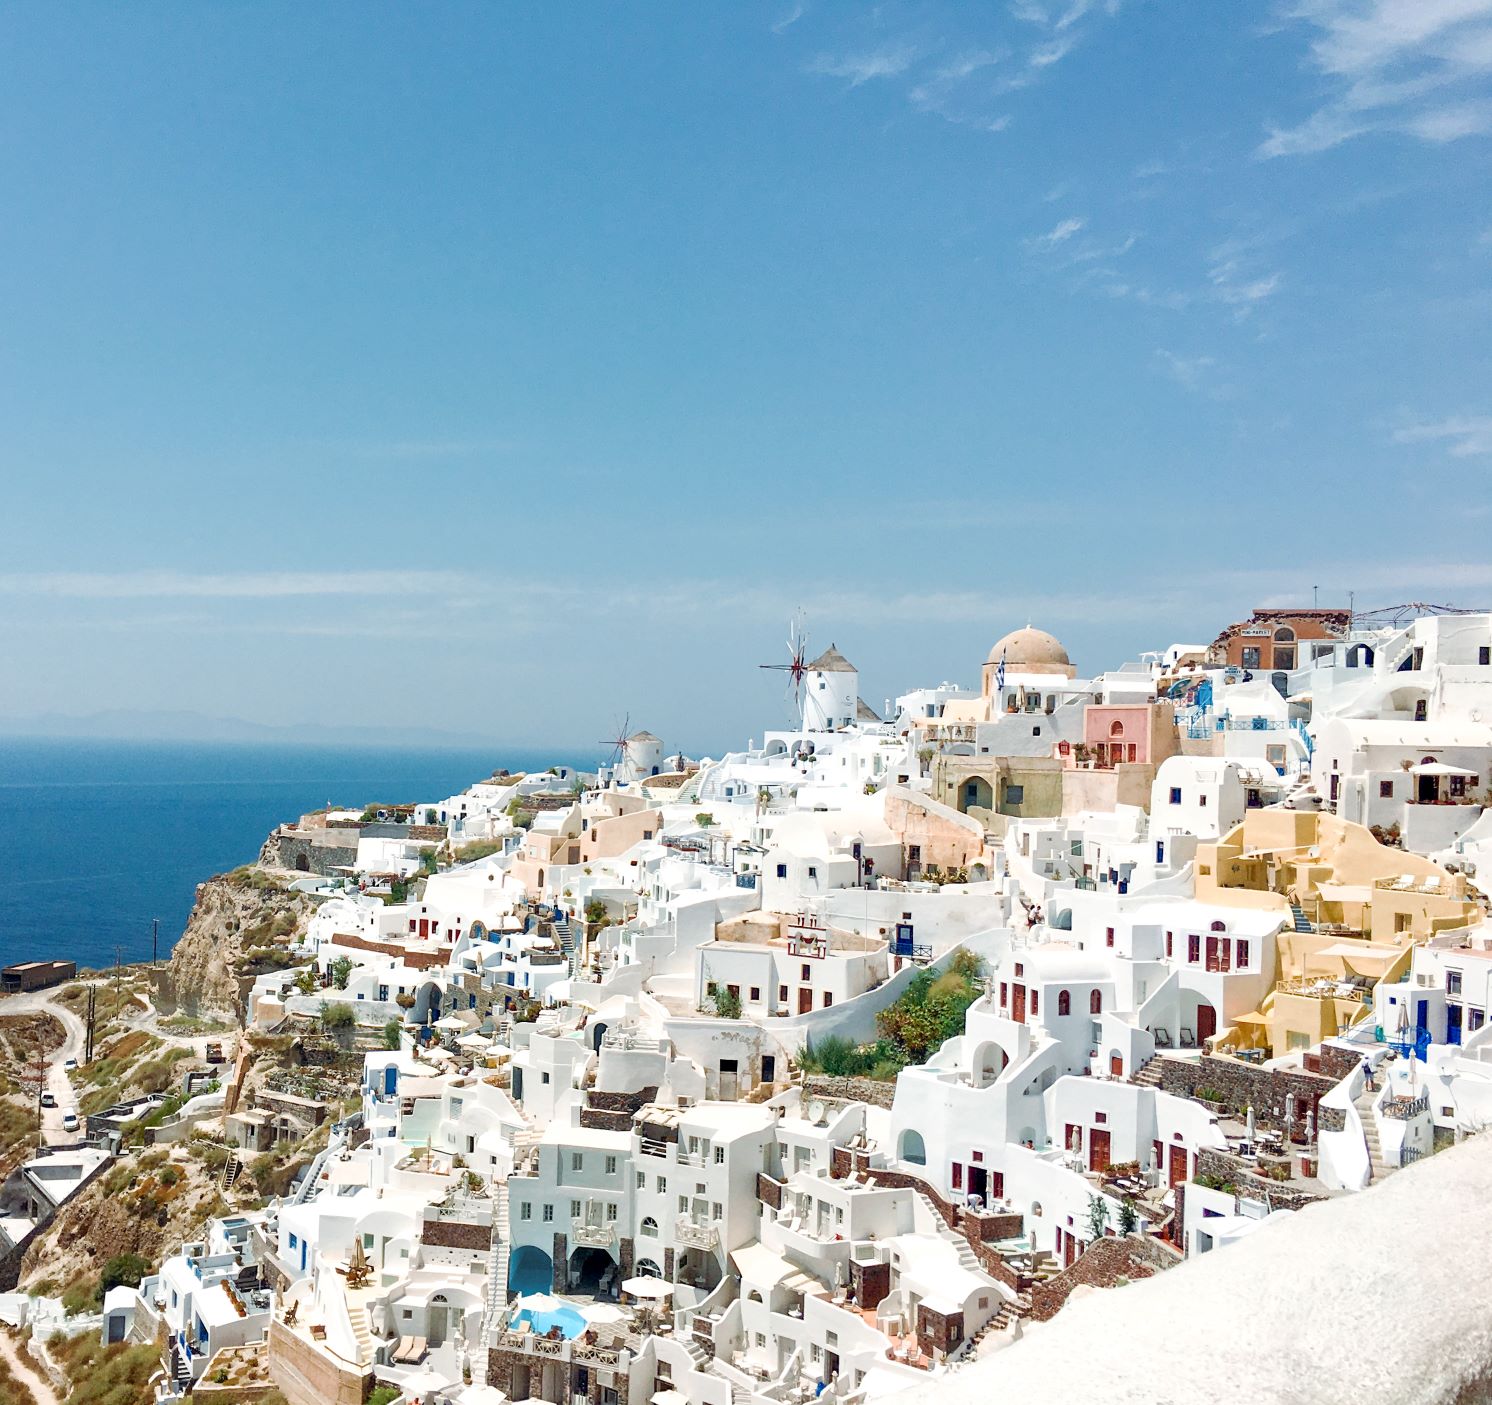 The most iconic shot of Santorini is in Oia, where white buildings shine in the sun. The sunny island is one of the best vacation spots for any traveler.